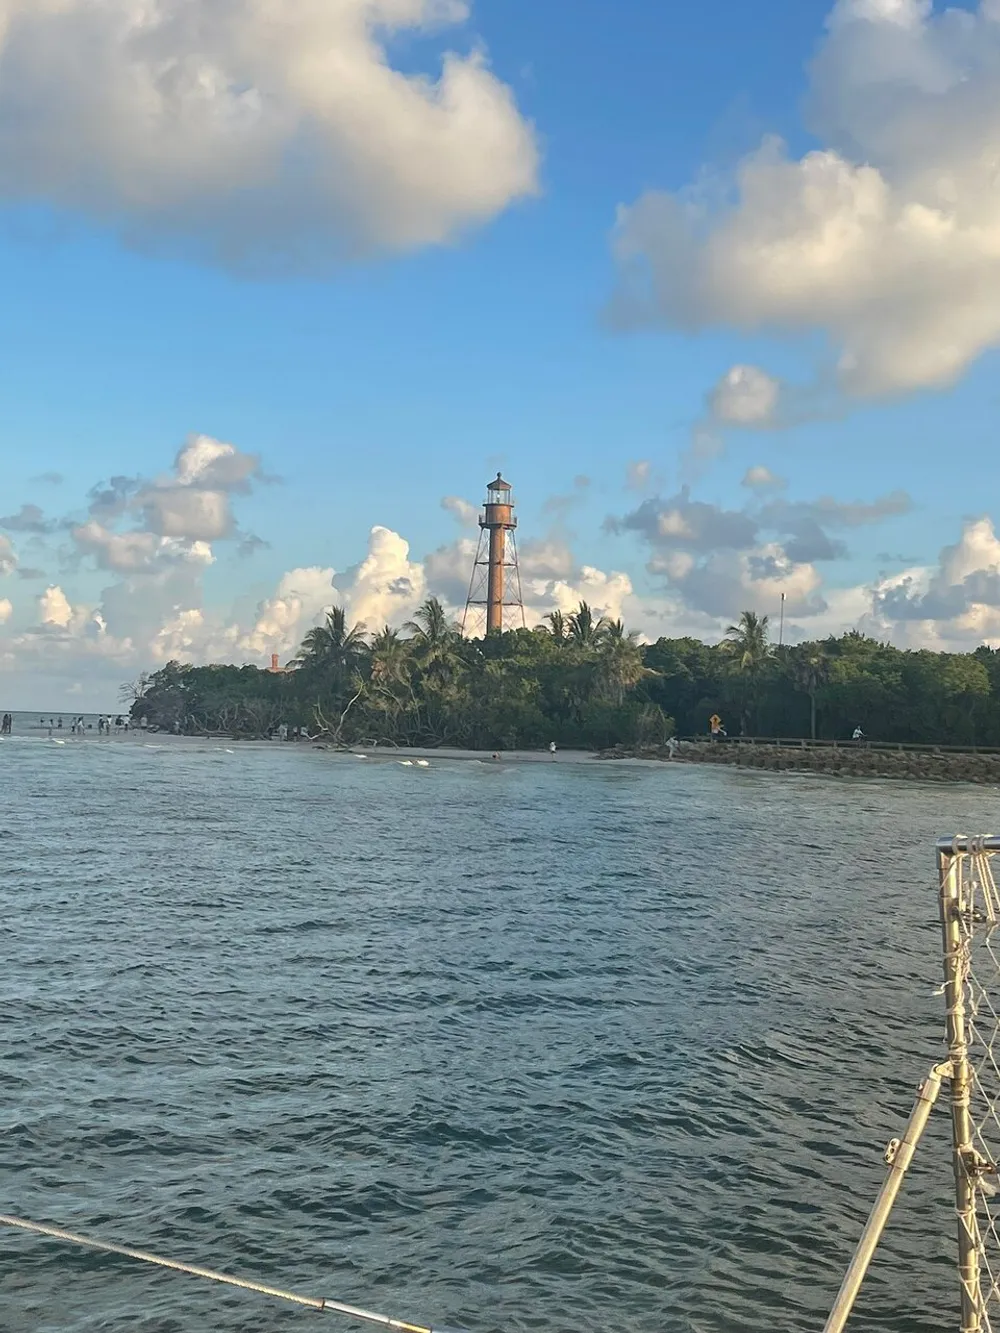 The image captures a rustic lighthouse standing among tropical foliage on a coastal area with the ocean in the foreground and a partly cloudy sky above